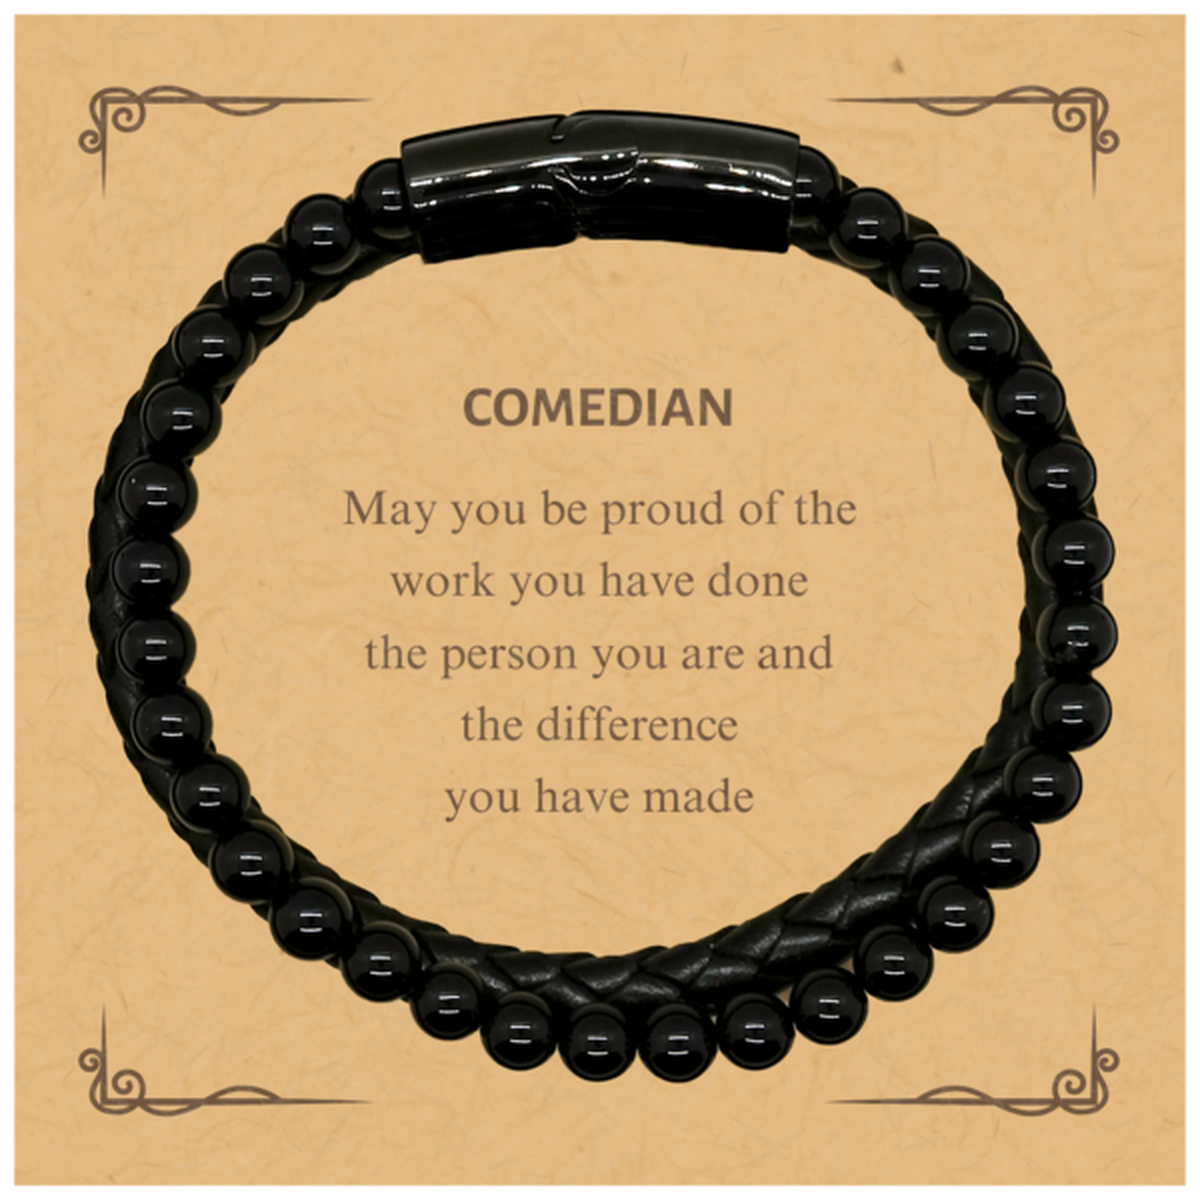 Comedian May you be proud of the work you have done, Retirement Comedian Stone Leather Bracelets for Colleague Appreciation Gifts Amazing for Comedian